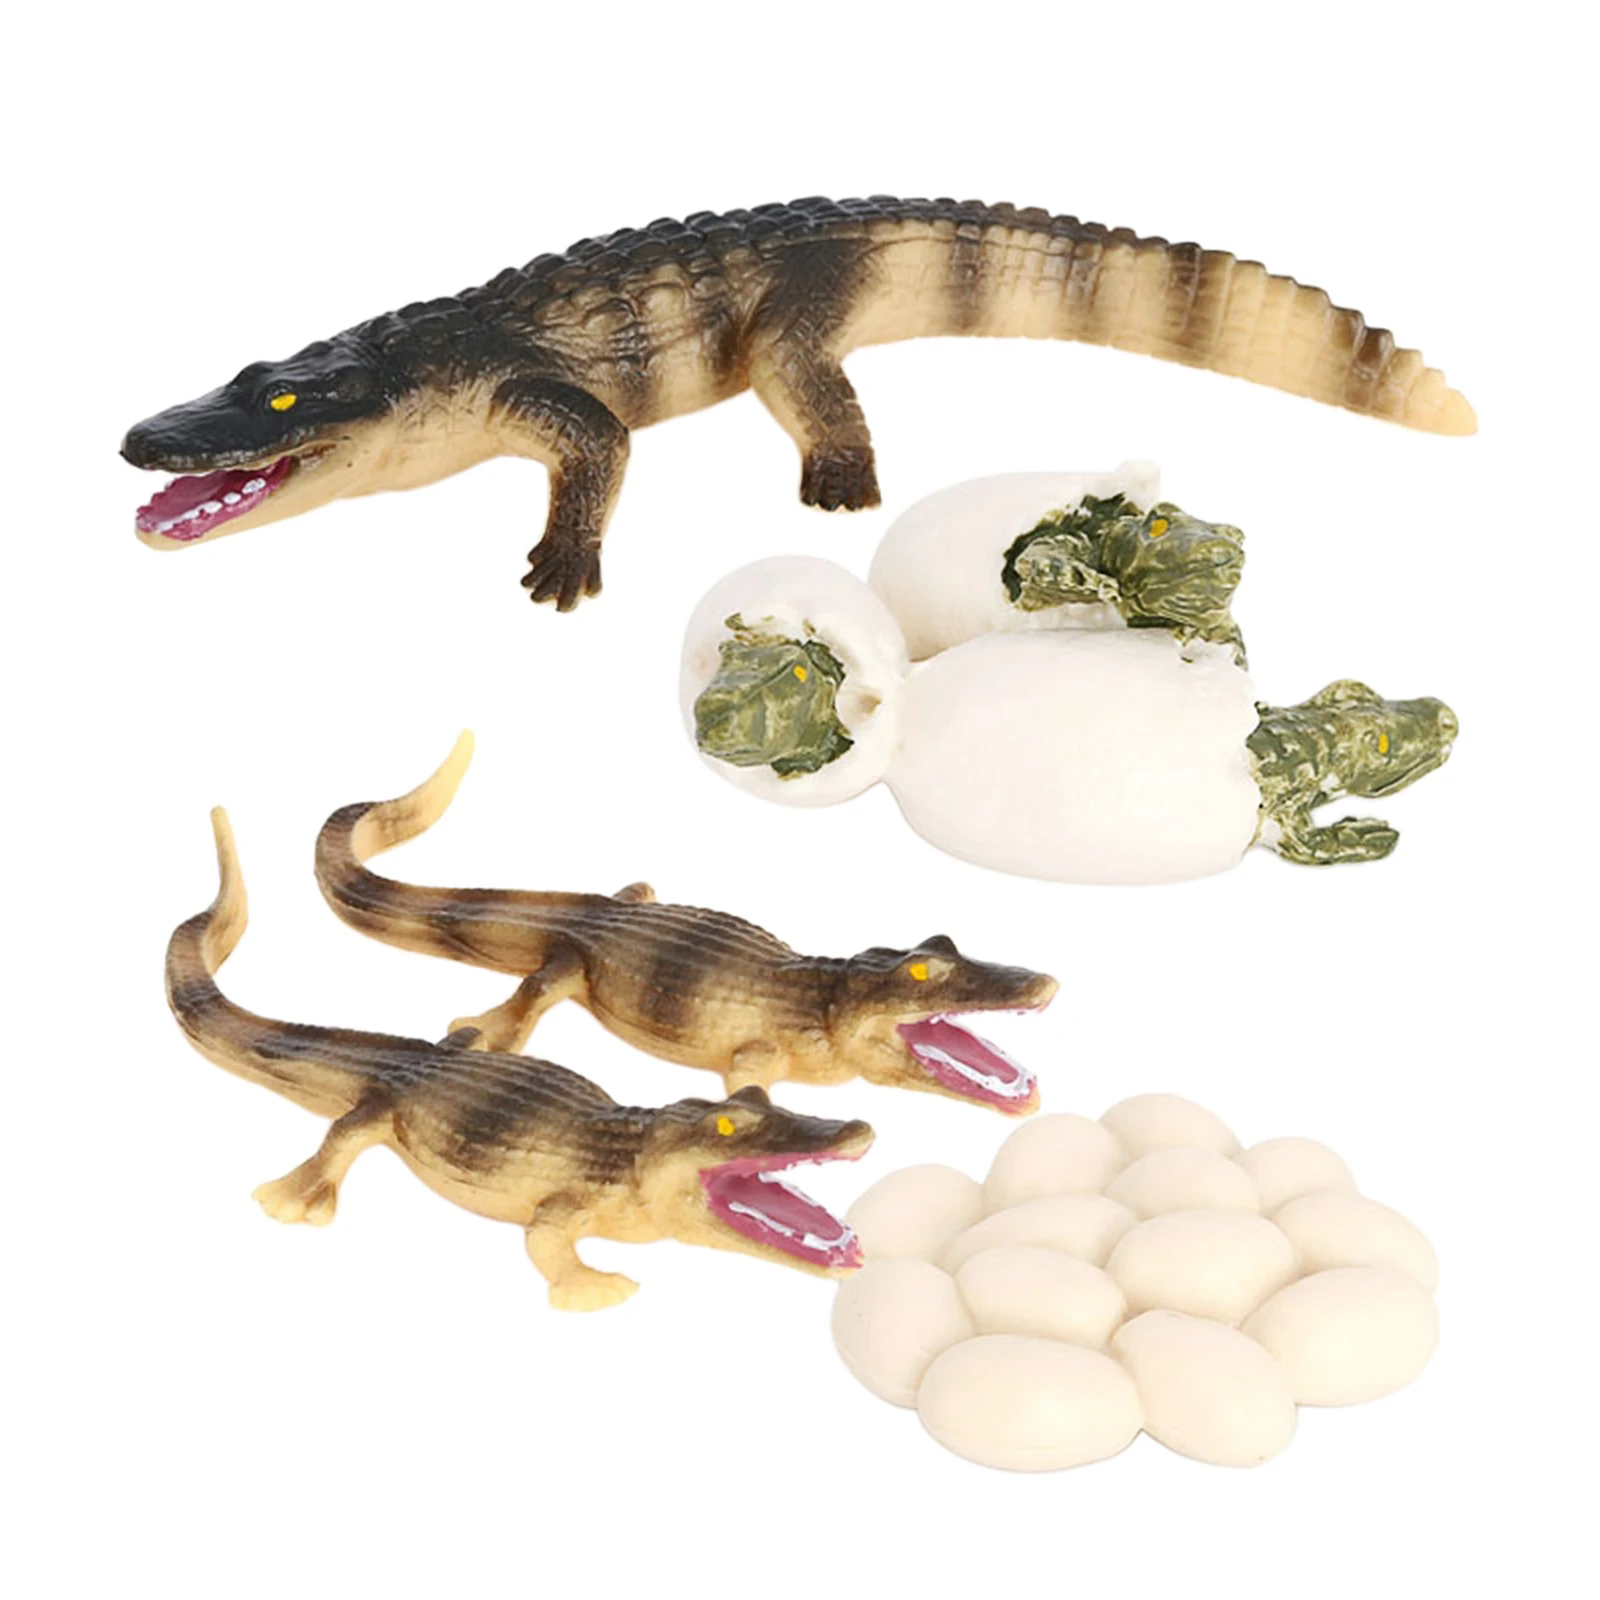 2xLife Cycle of Crocodile Nature Insects Growth Model Animal Natural Kids Toy